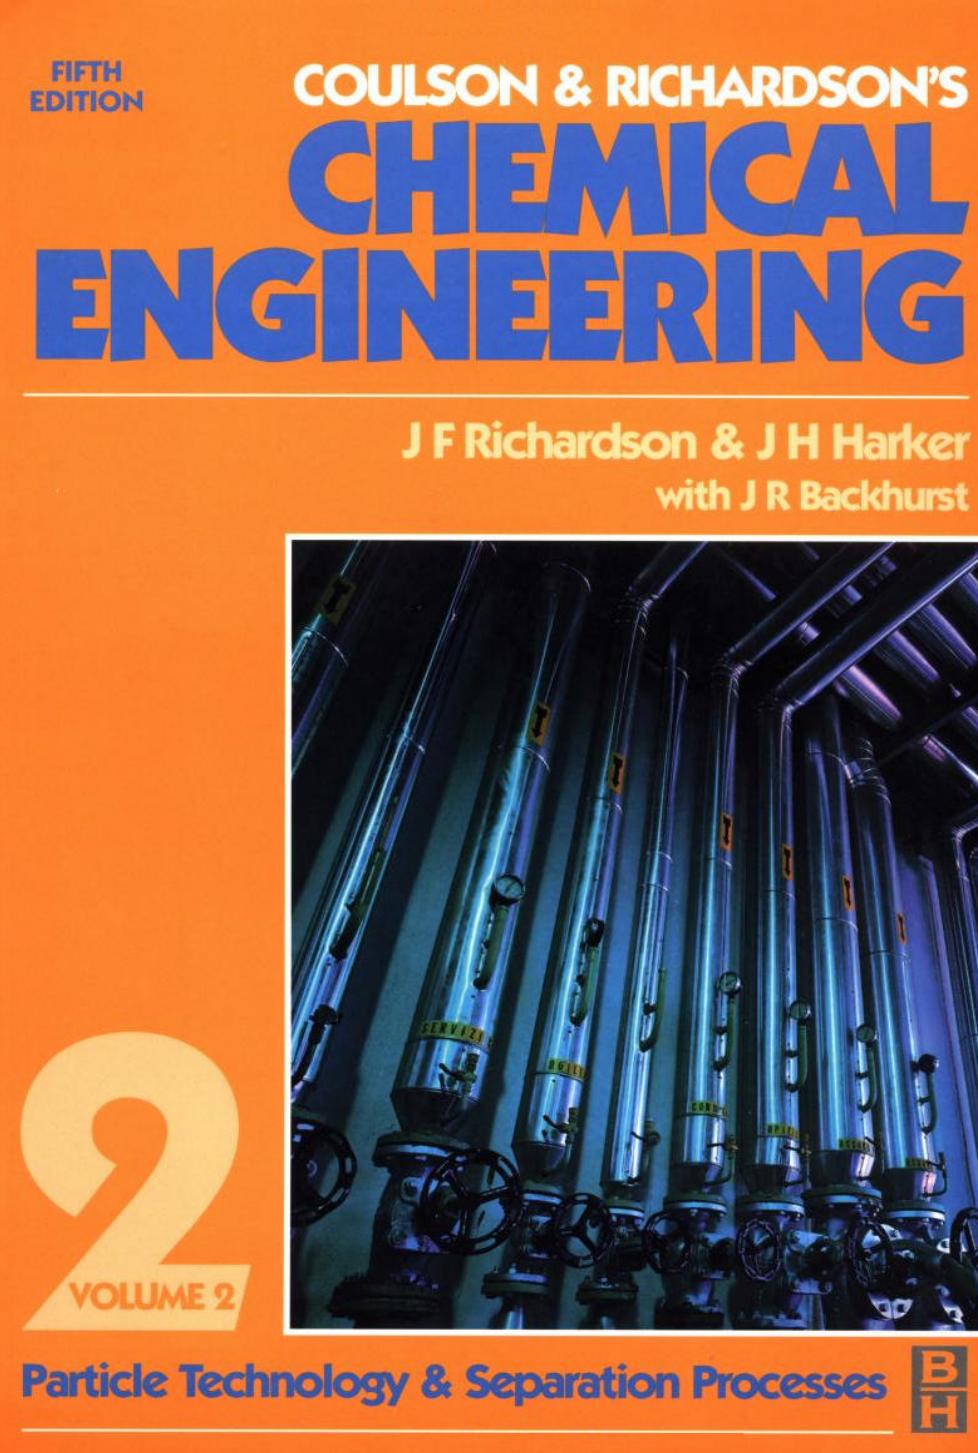 Coulson and Richardson's Chemical Engineering - Volume 2